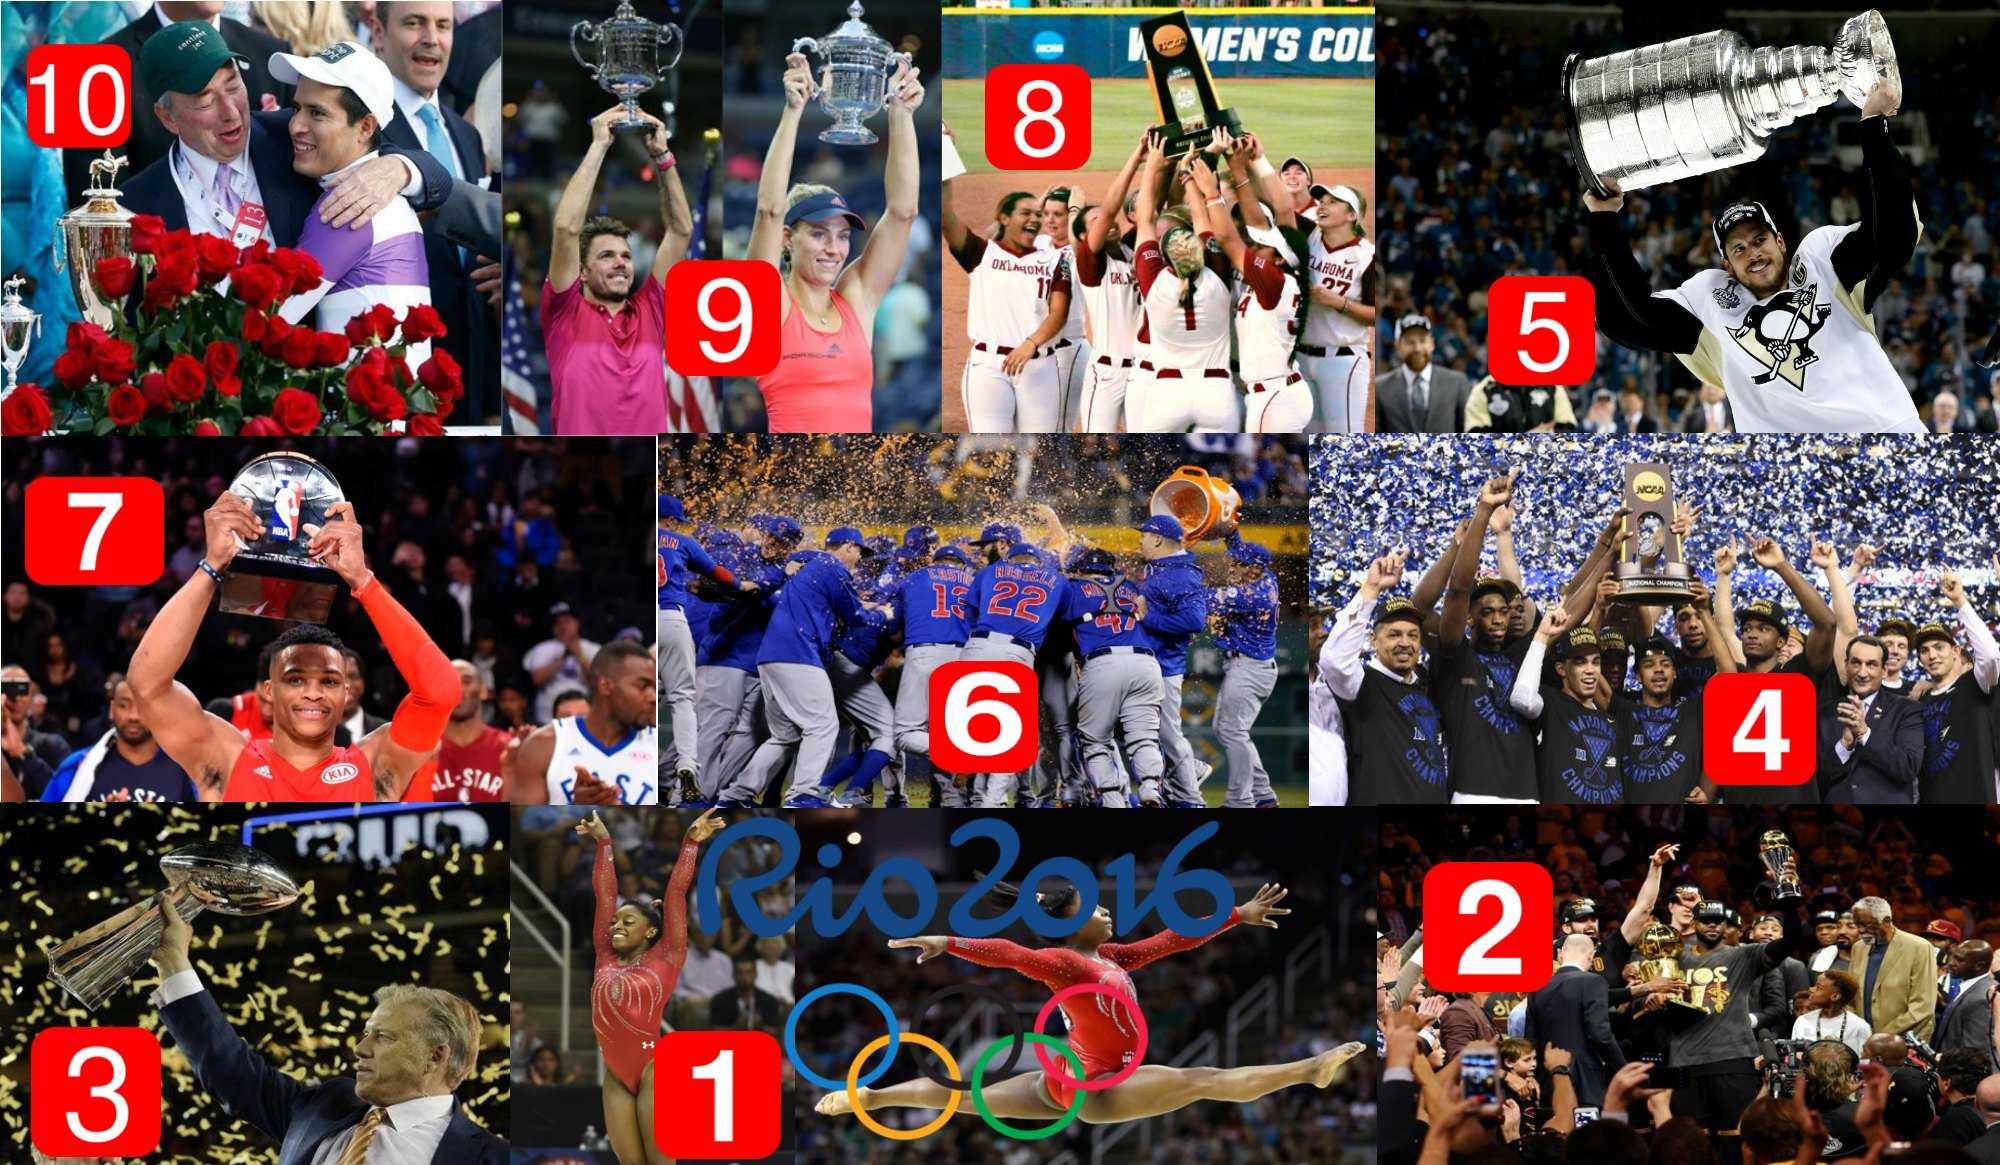 Top 10 of 2016 Major sports events to remember The Lance